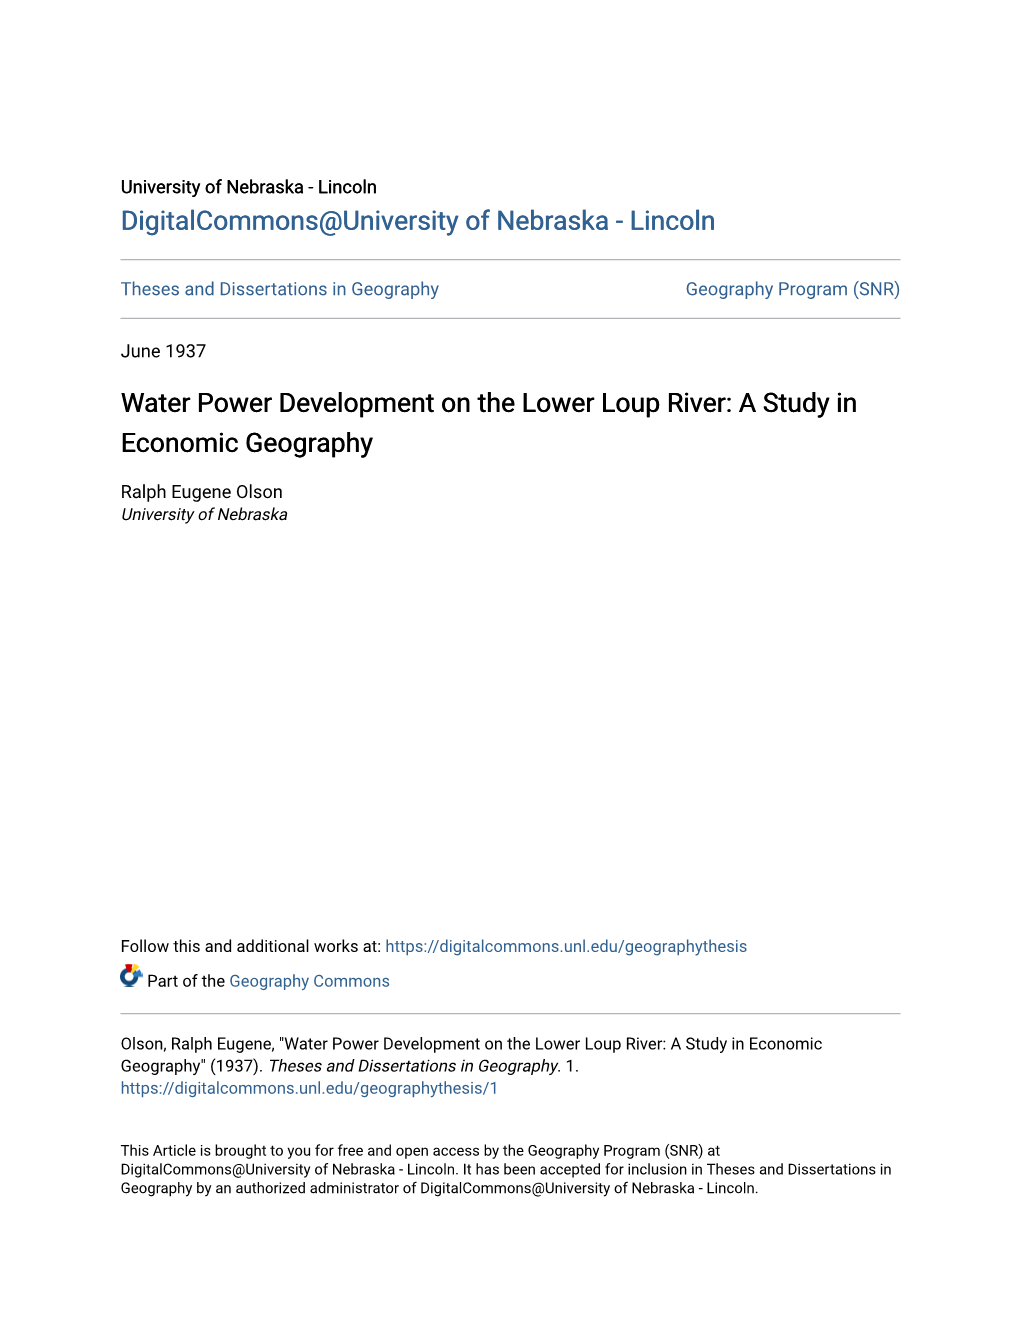 Water Power Development on the Lower Loup River: a Study in Economic Geography